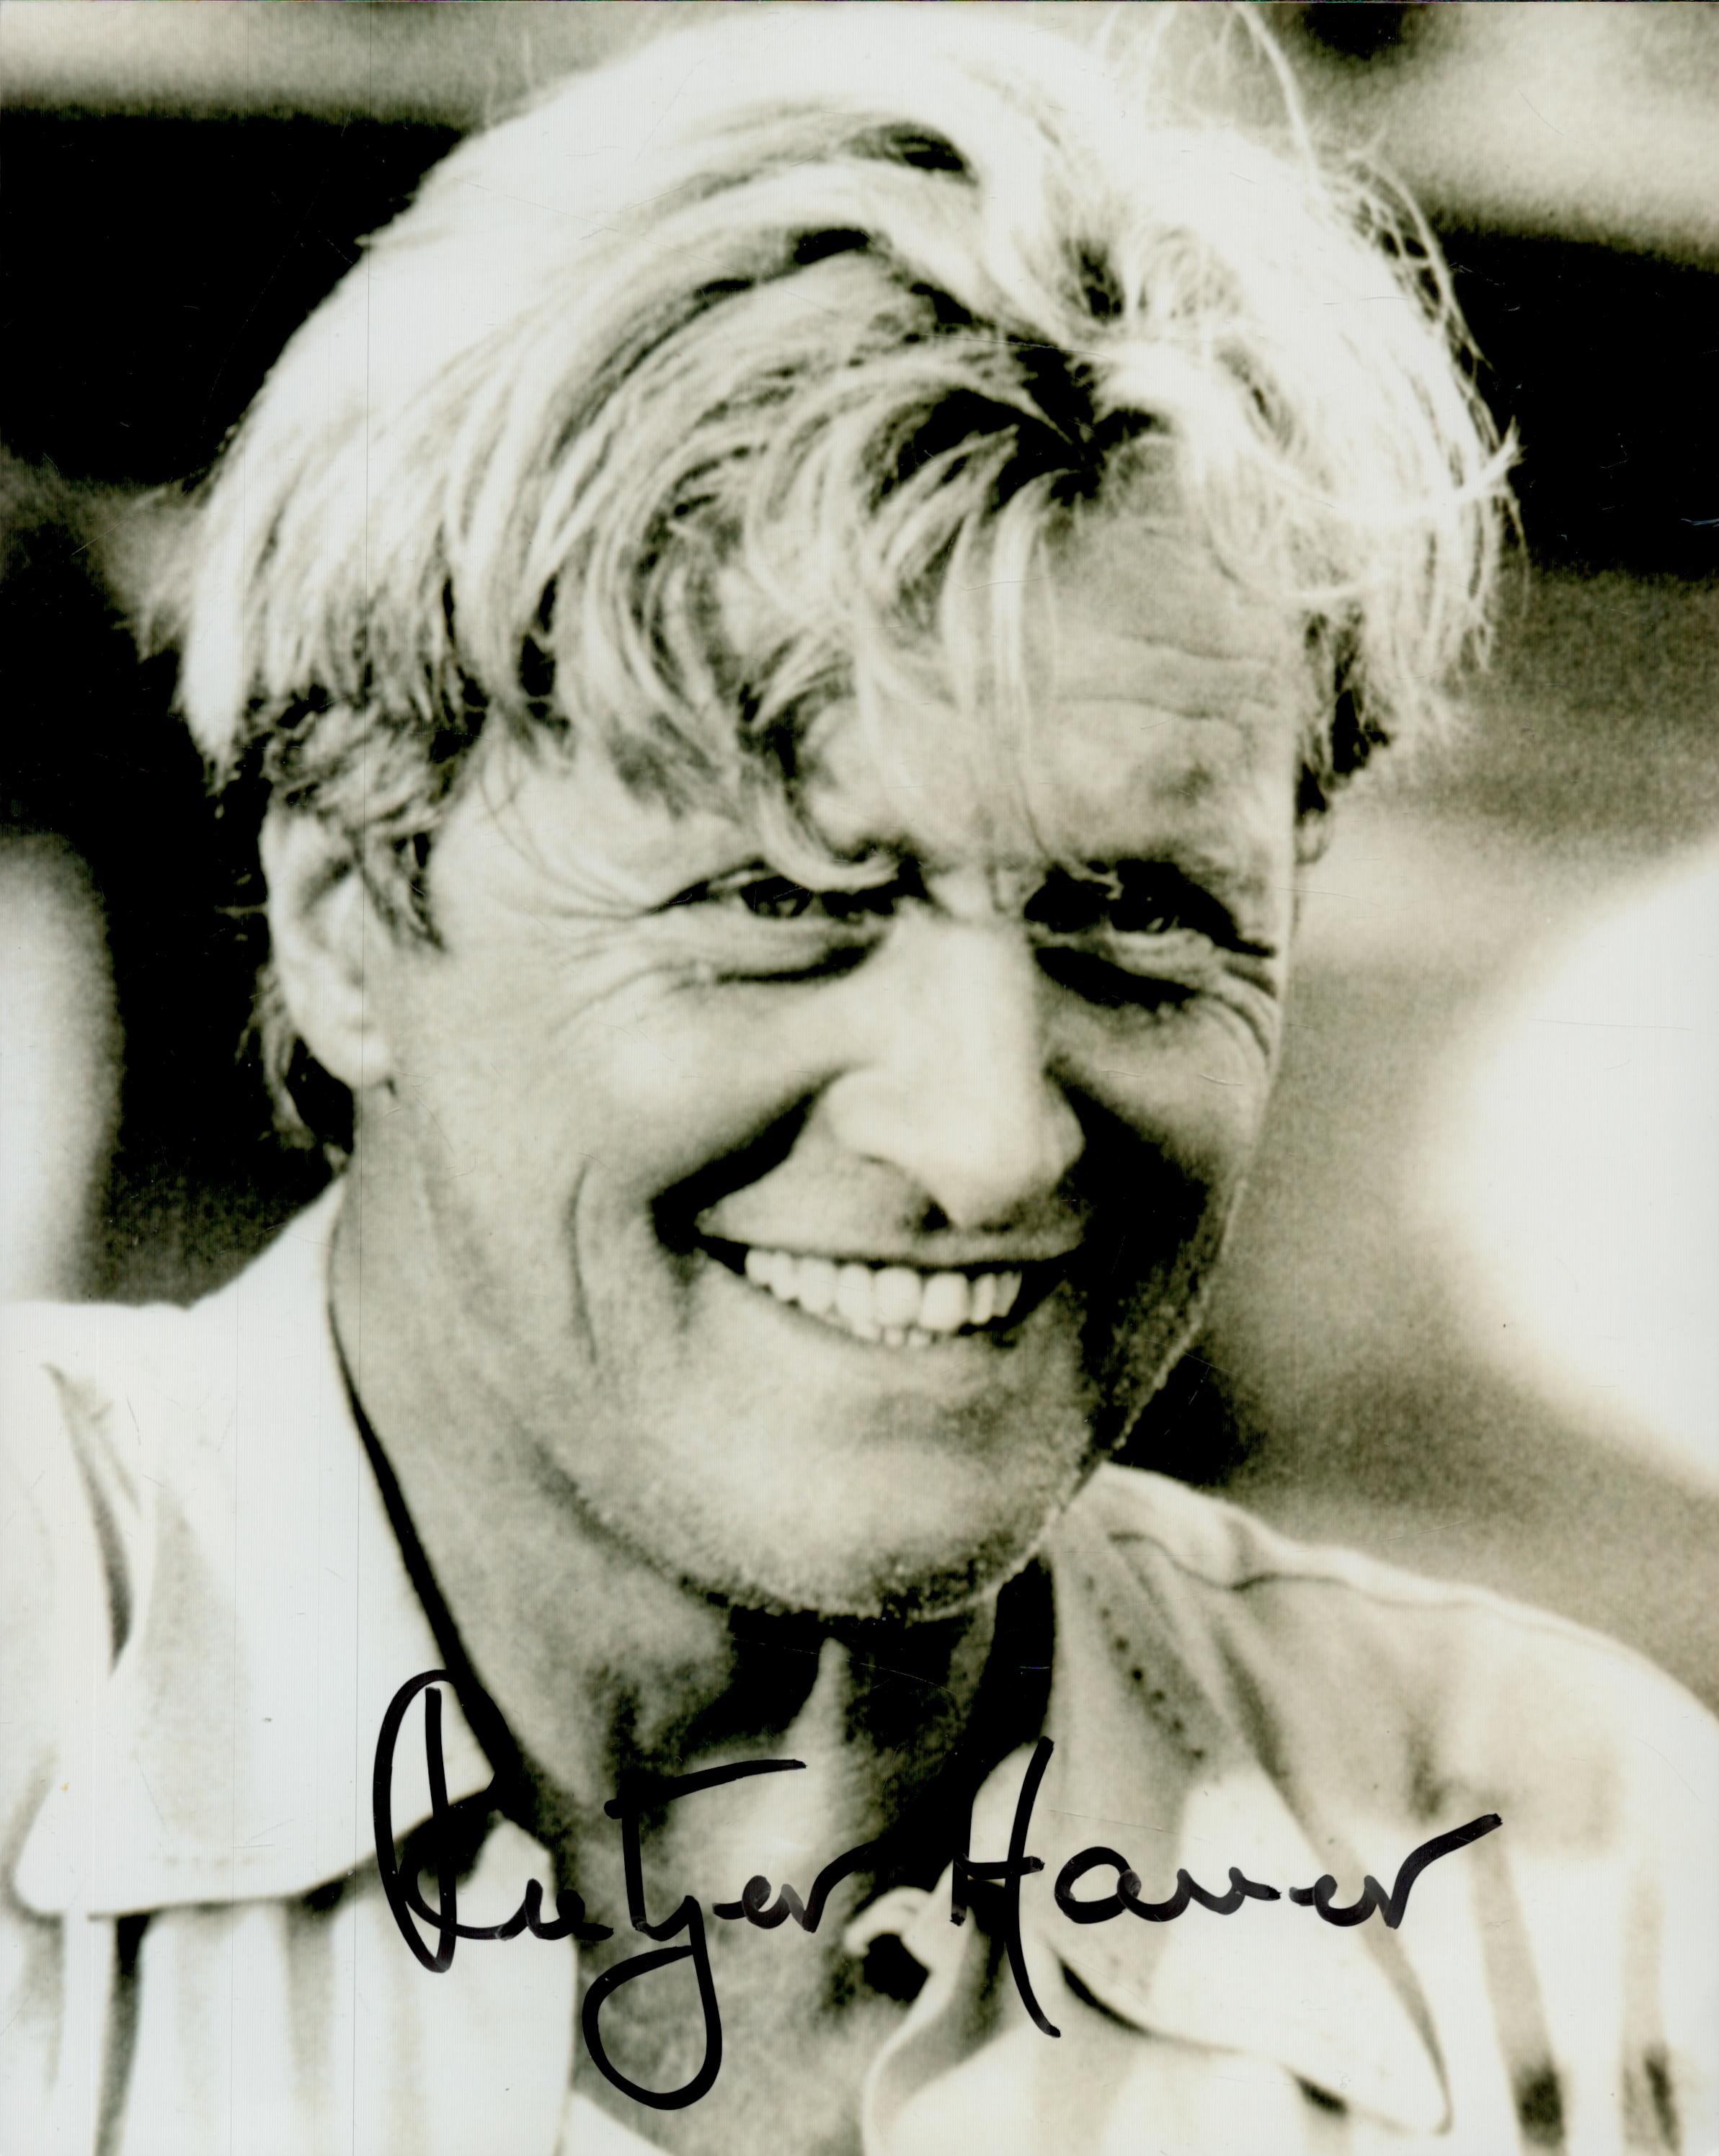 Rutger Hauer signed 10x8inch black and white photo. Also comes with TLS dated 21/3/2005. Good